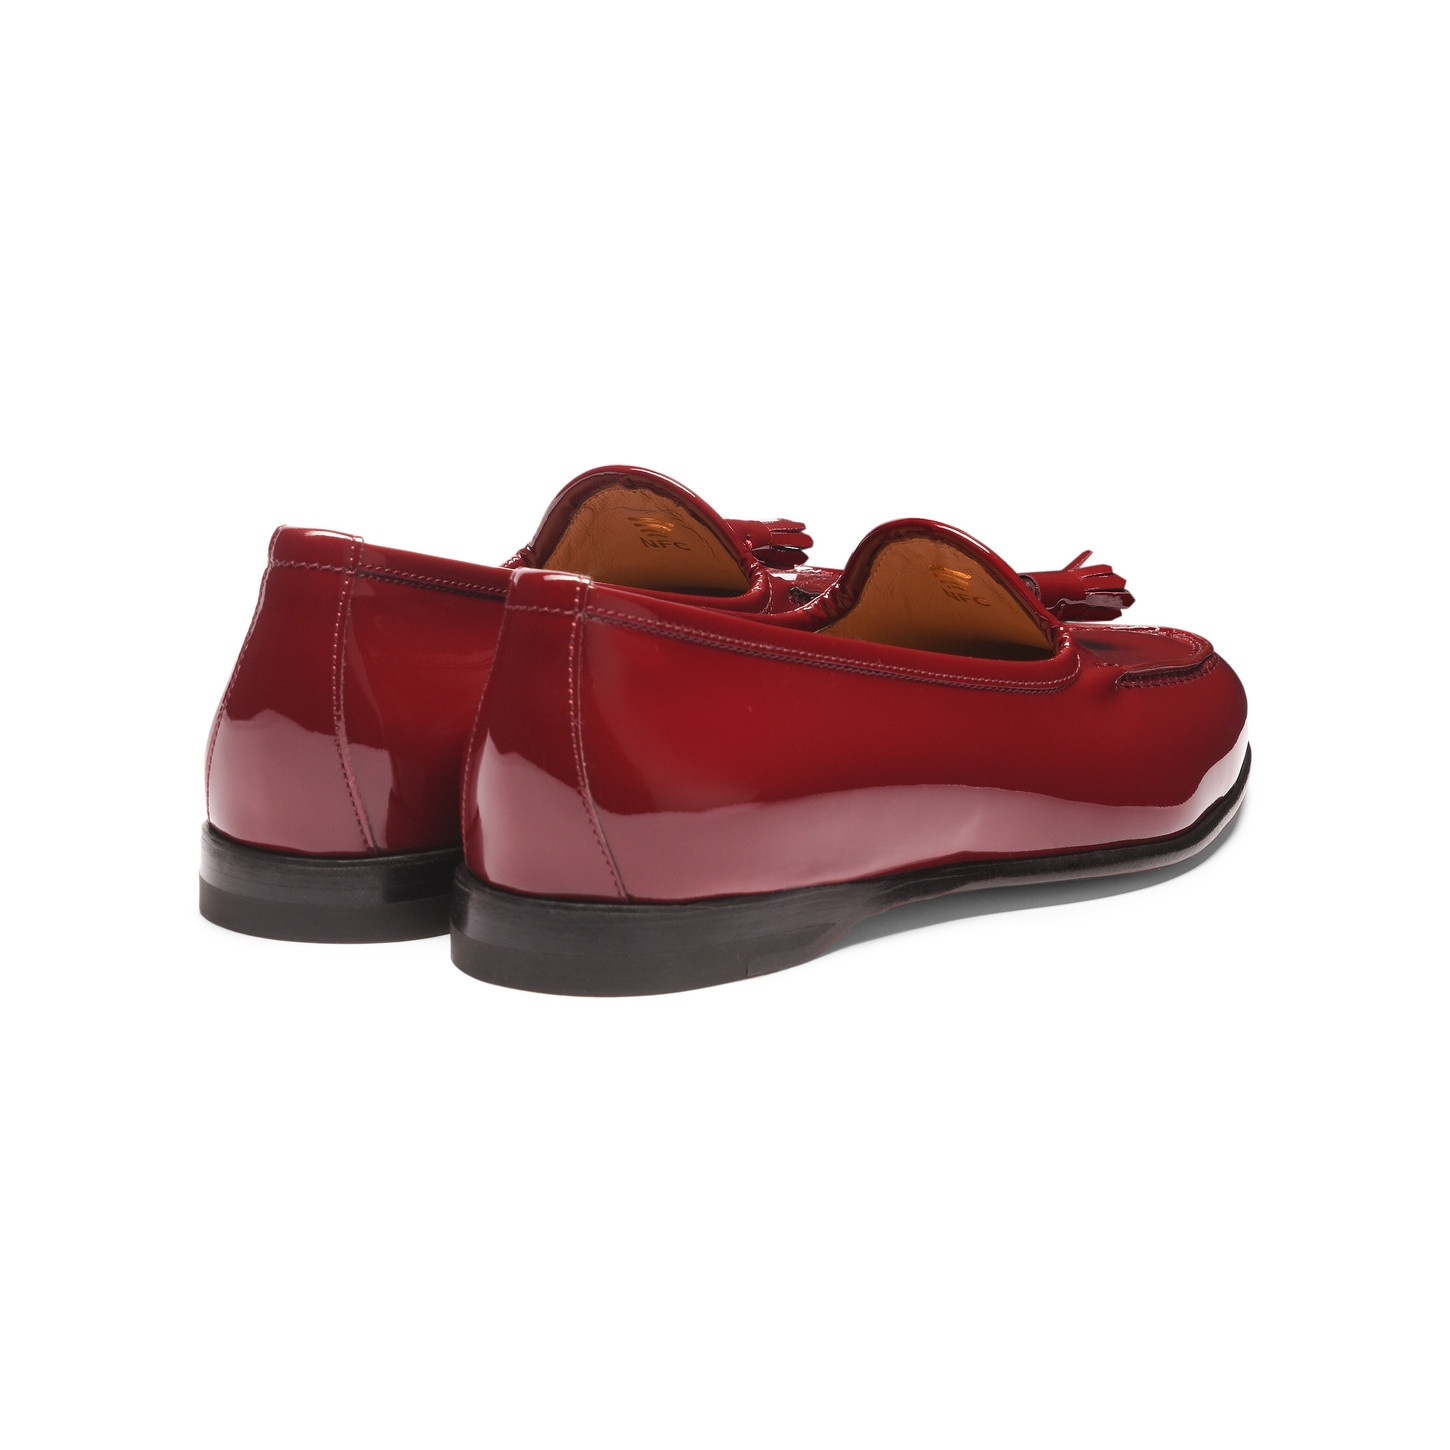 Women's red patent leather Andrea tassel loafer - 3